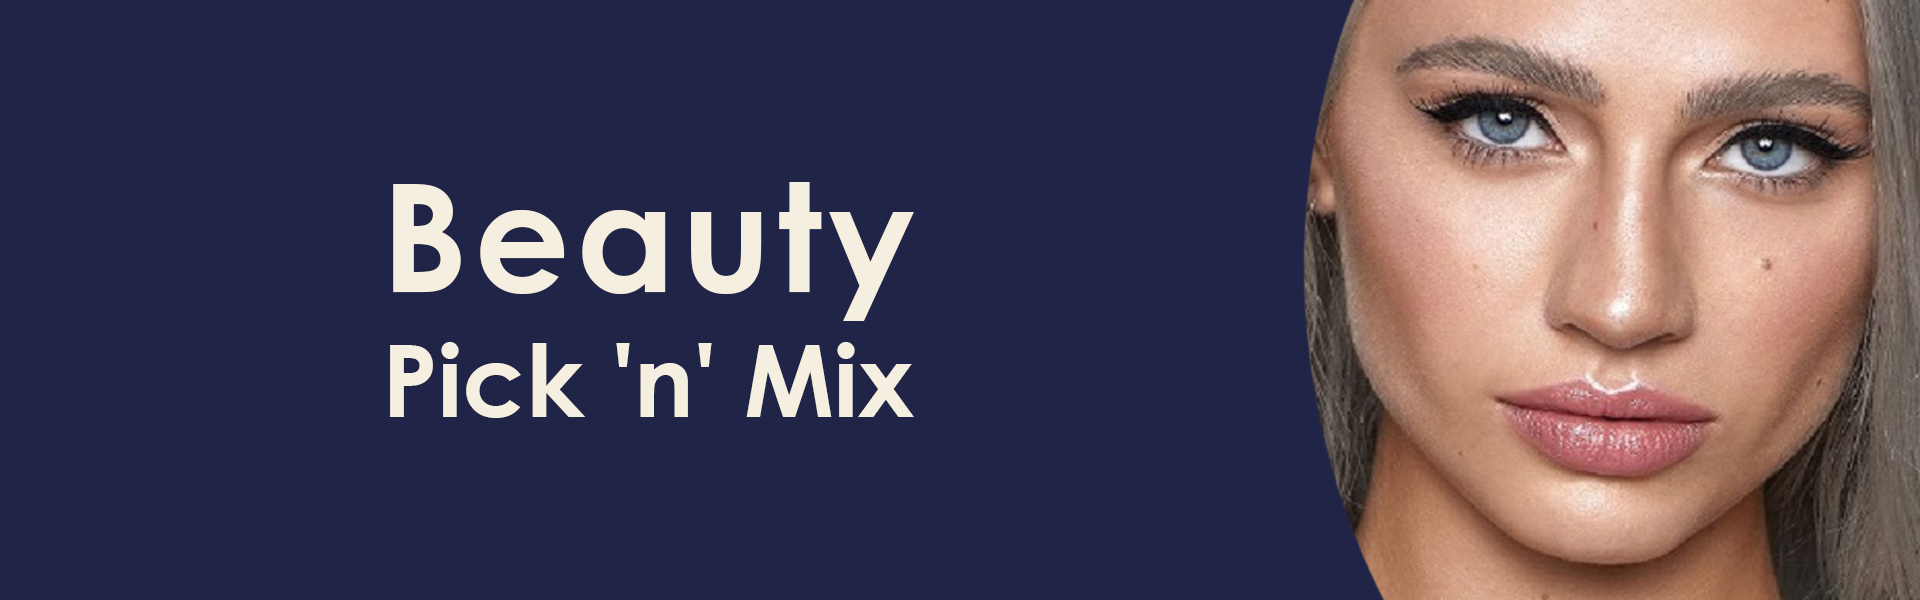 Beauty Treatment Pick 'n' Mix at Dudley's Beauty Salon in Bulwell